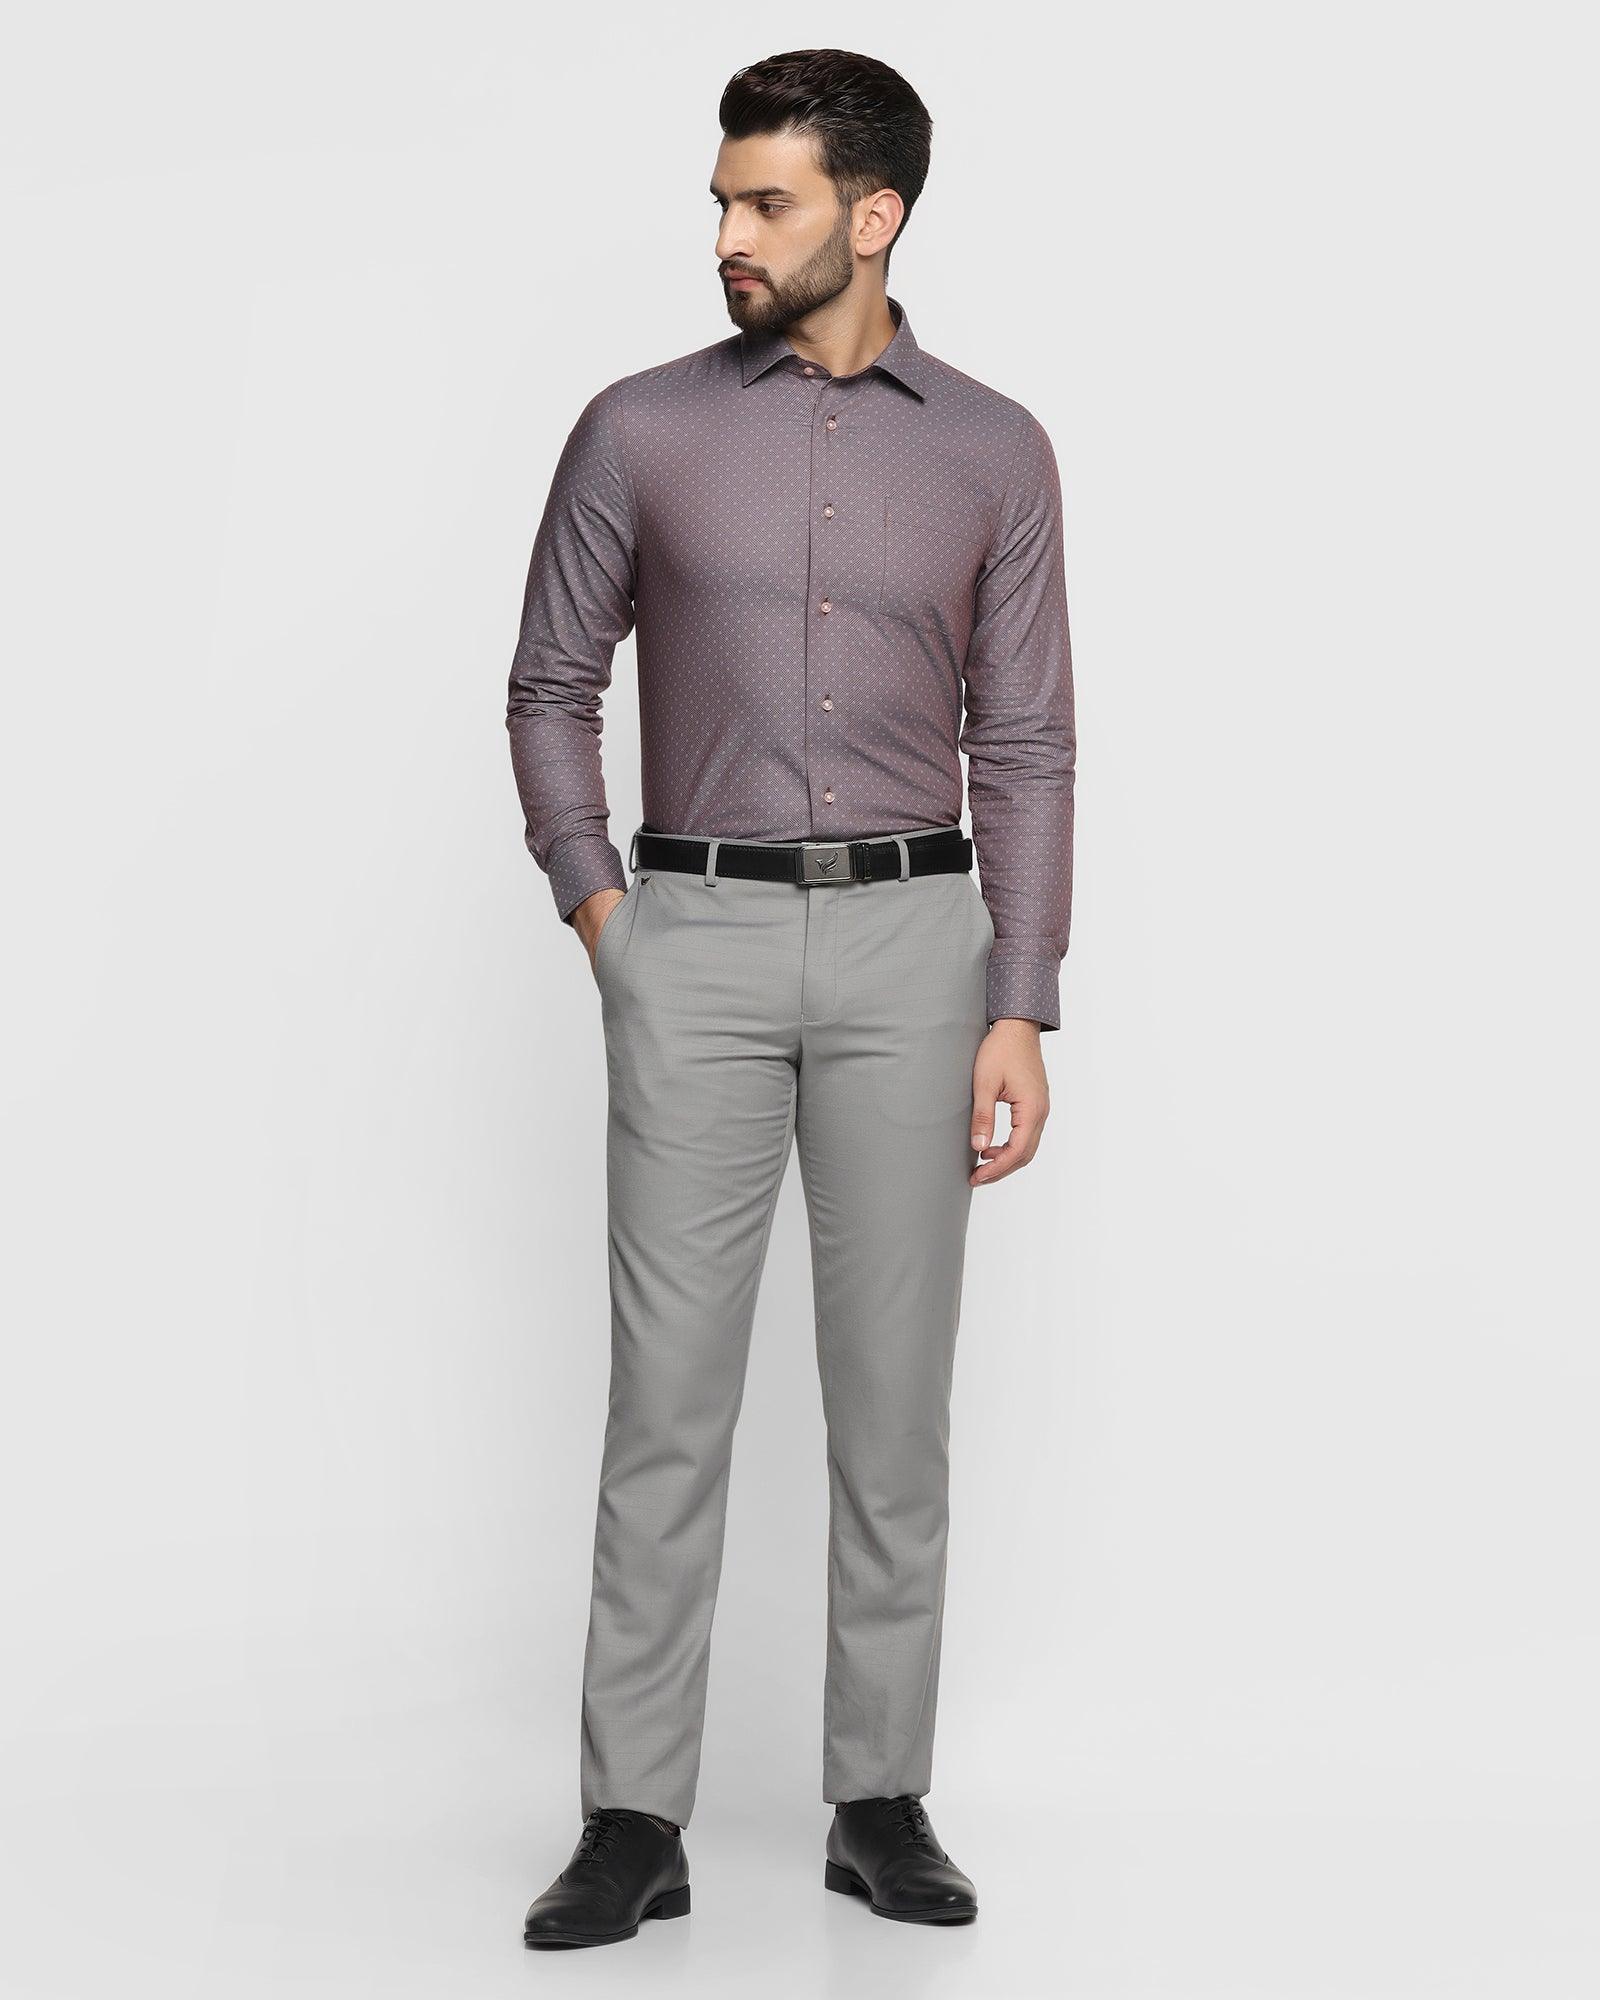 Buy RAYMOND Mens Solid Regular Fit Formal Shirt | Shoppers Stop